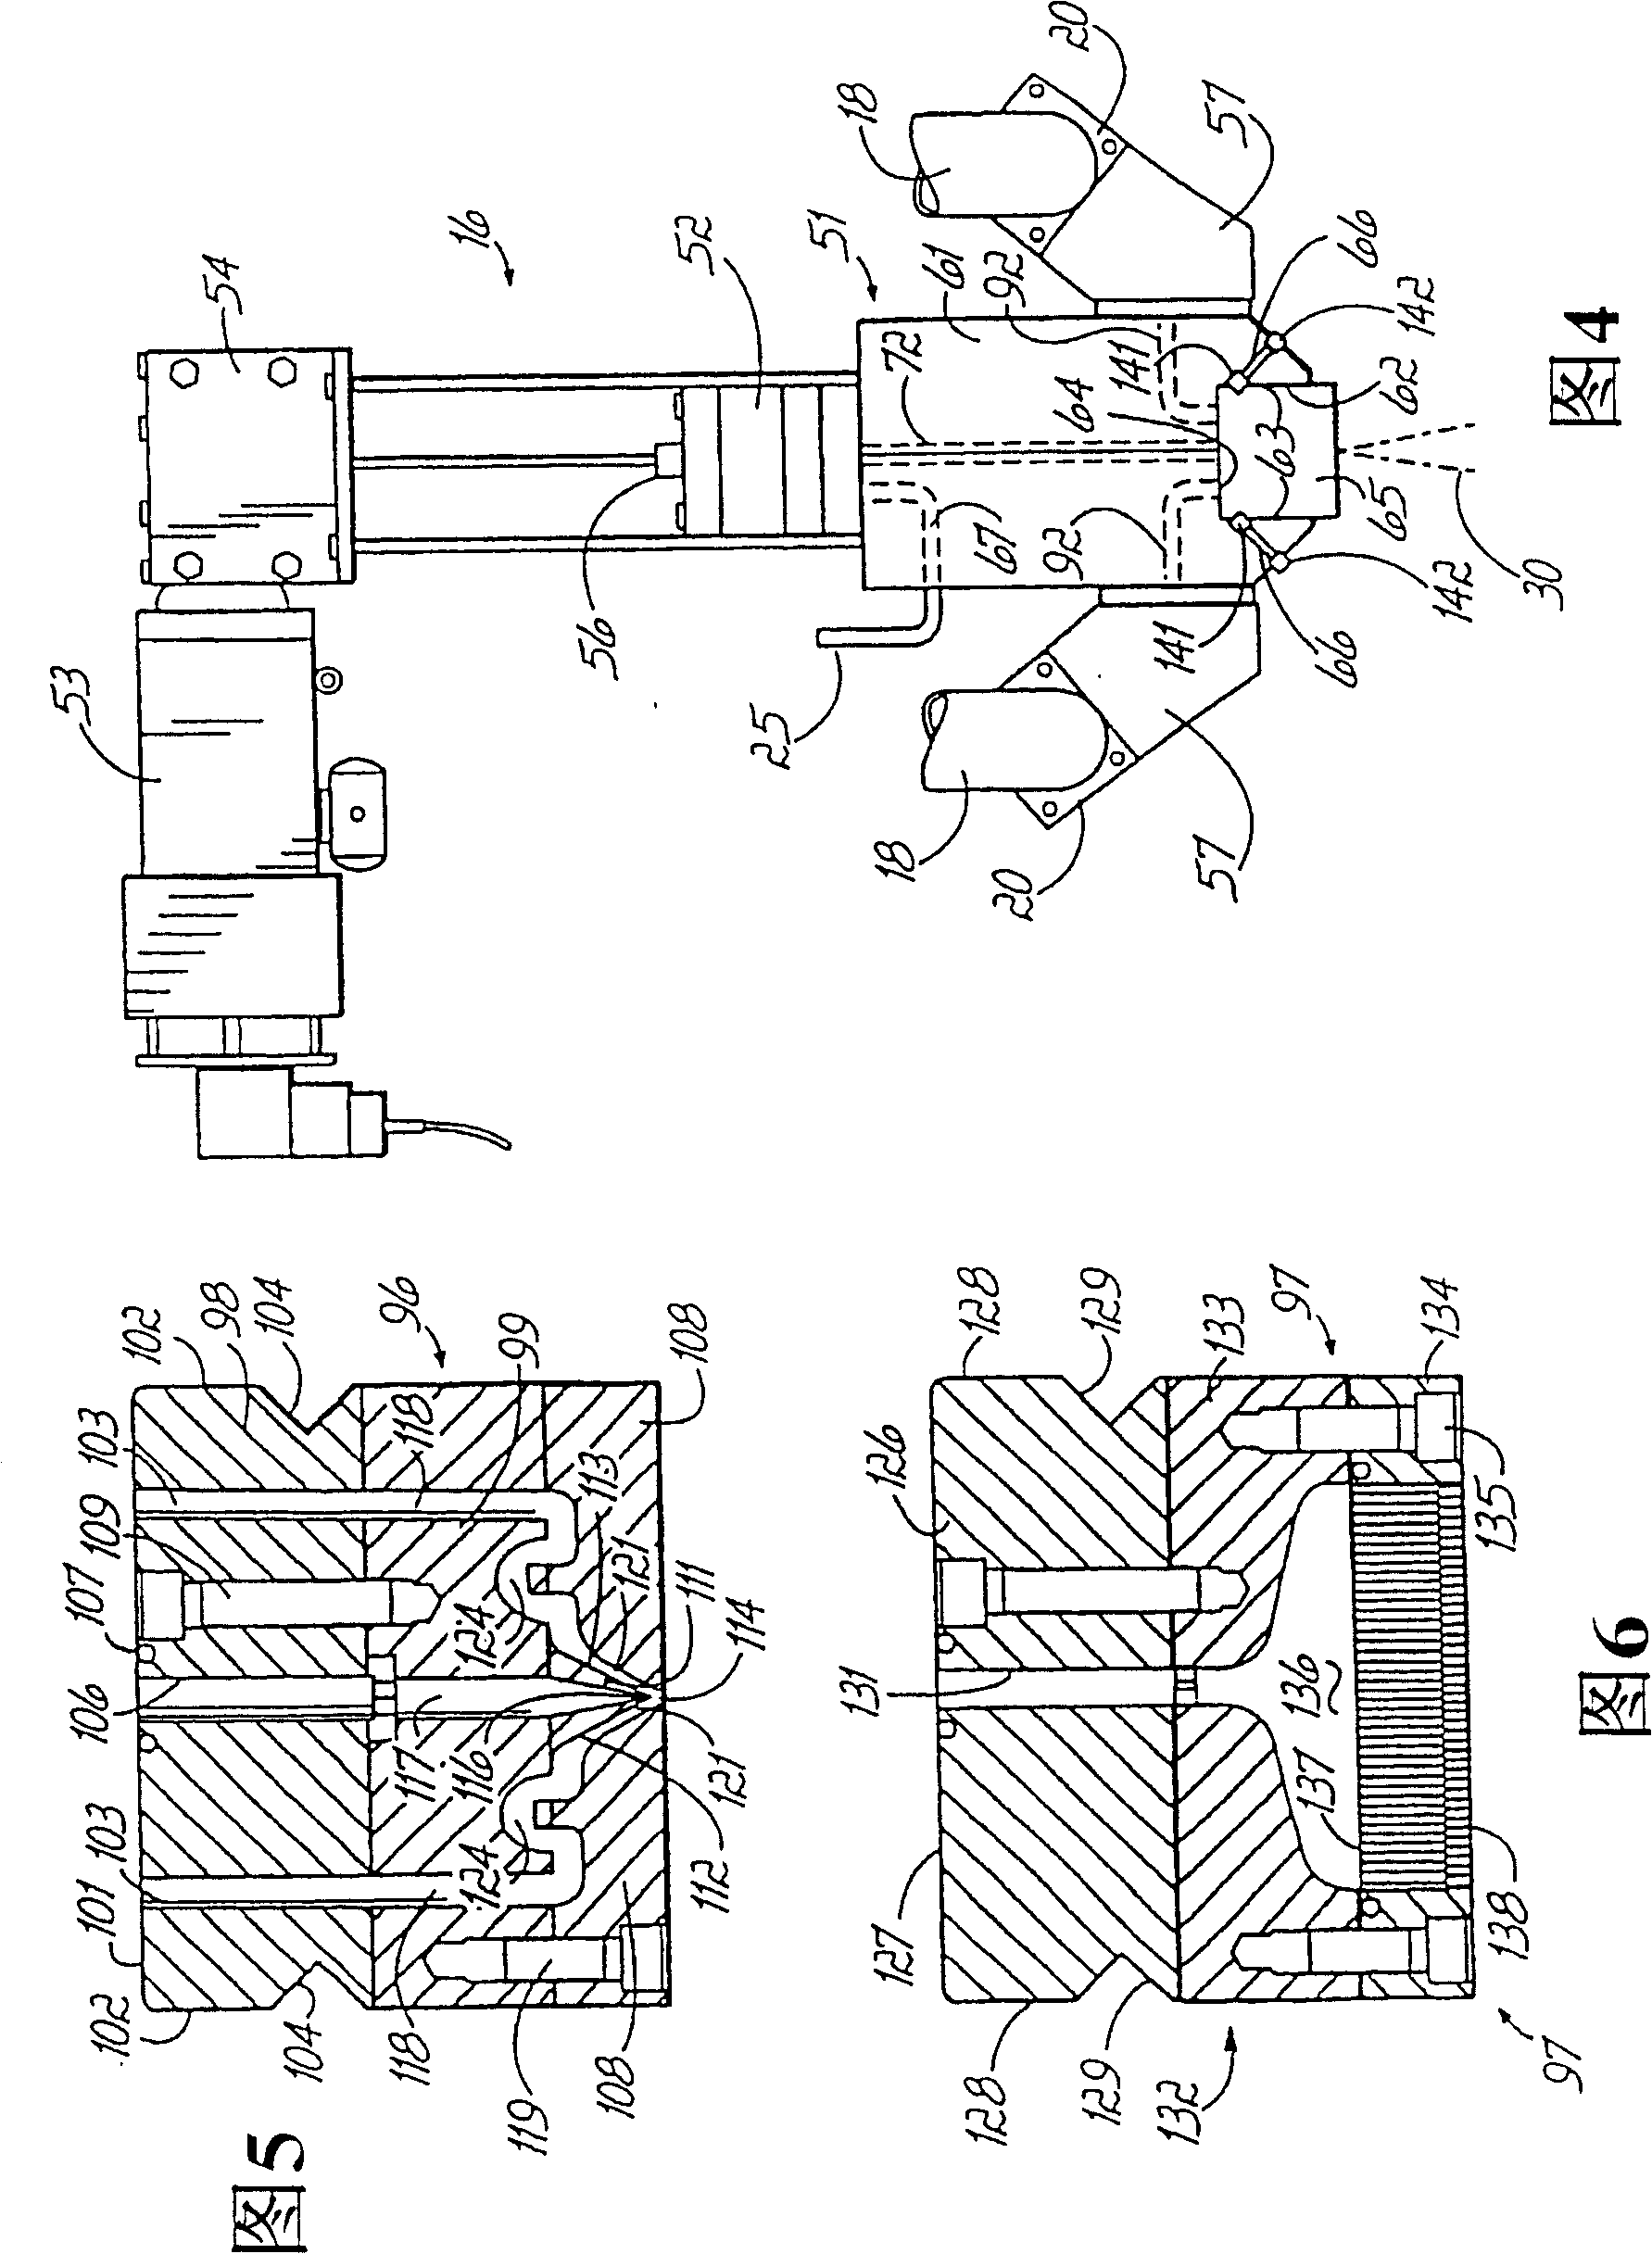 Absorbent composite product and process and apparatus for manufacture thereof